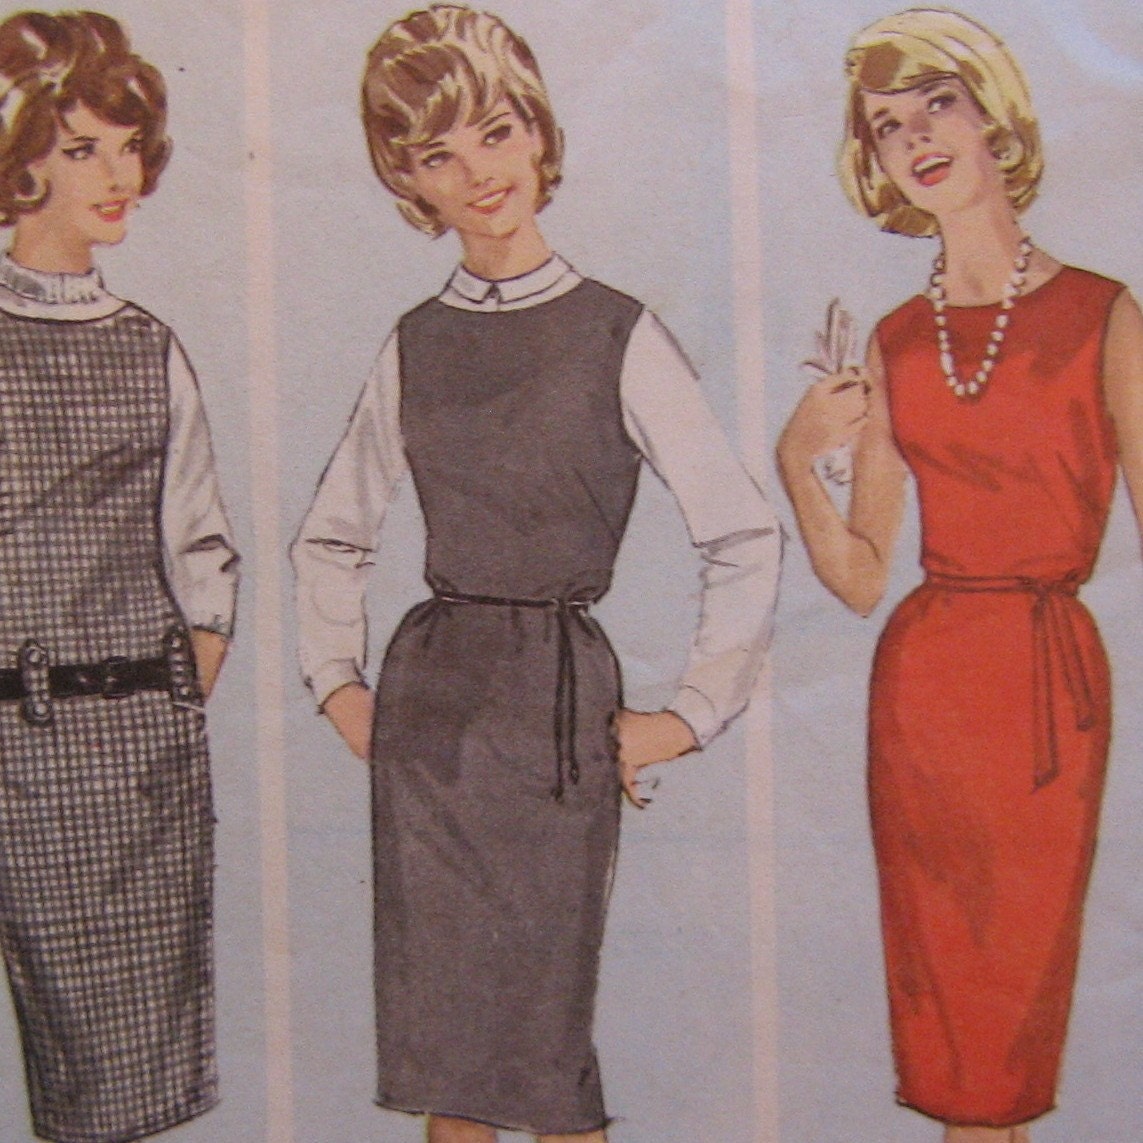 DRESS PATTERNS FOR TEENS &#171; Free Patterns